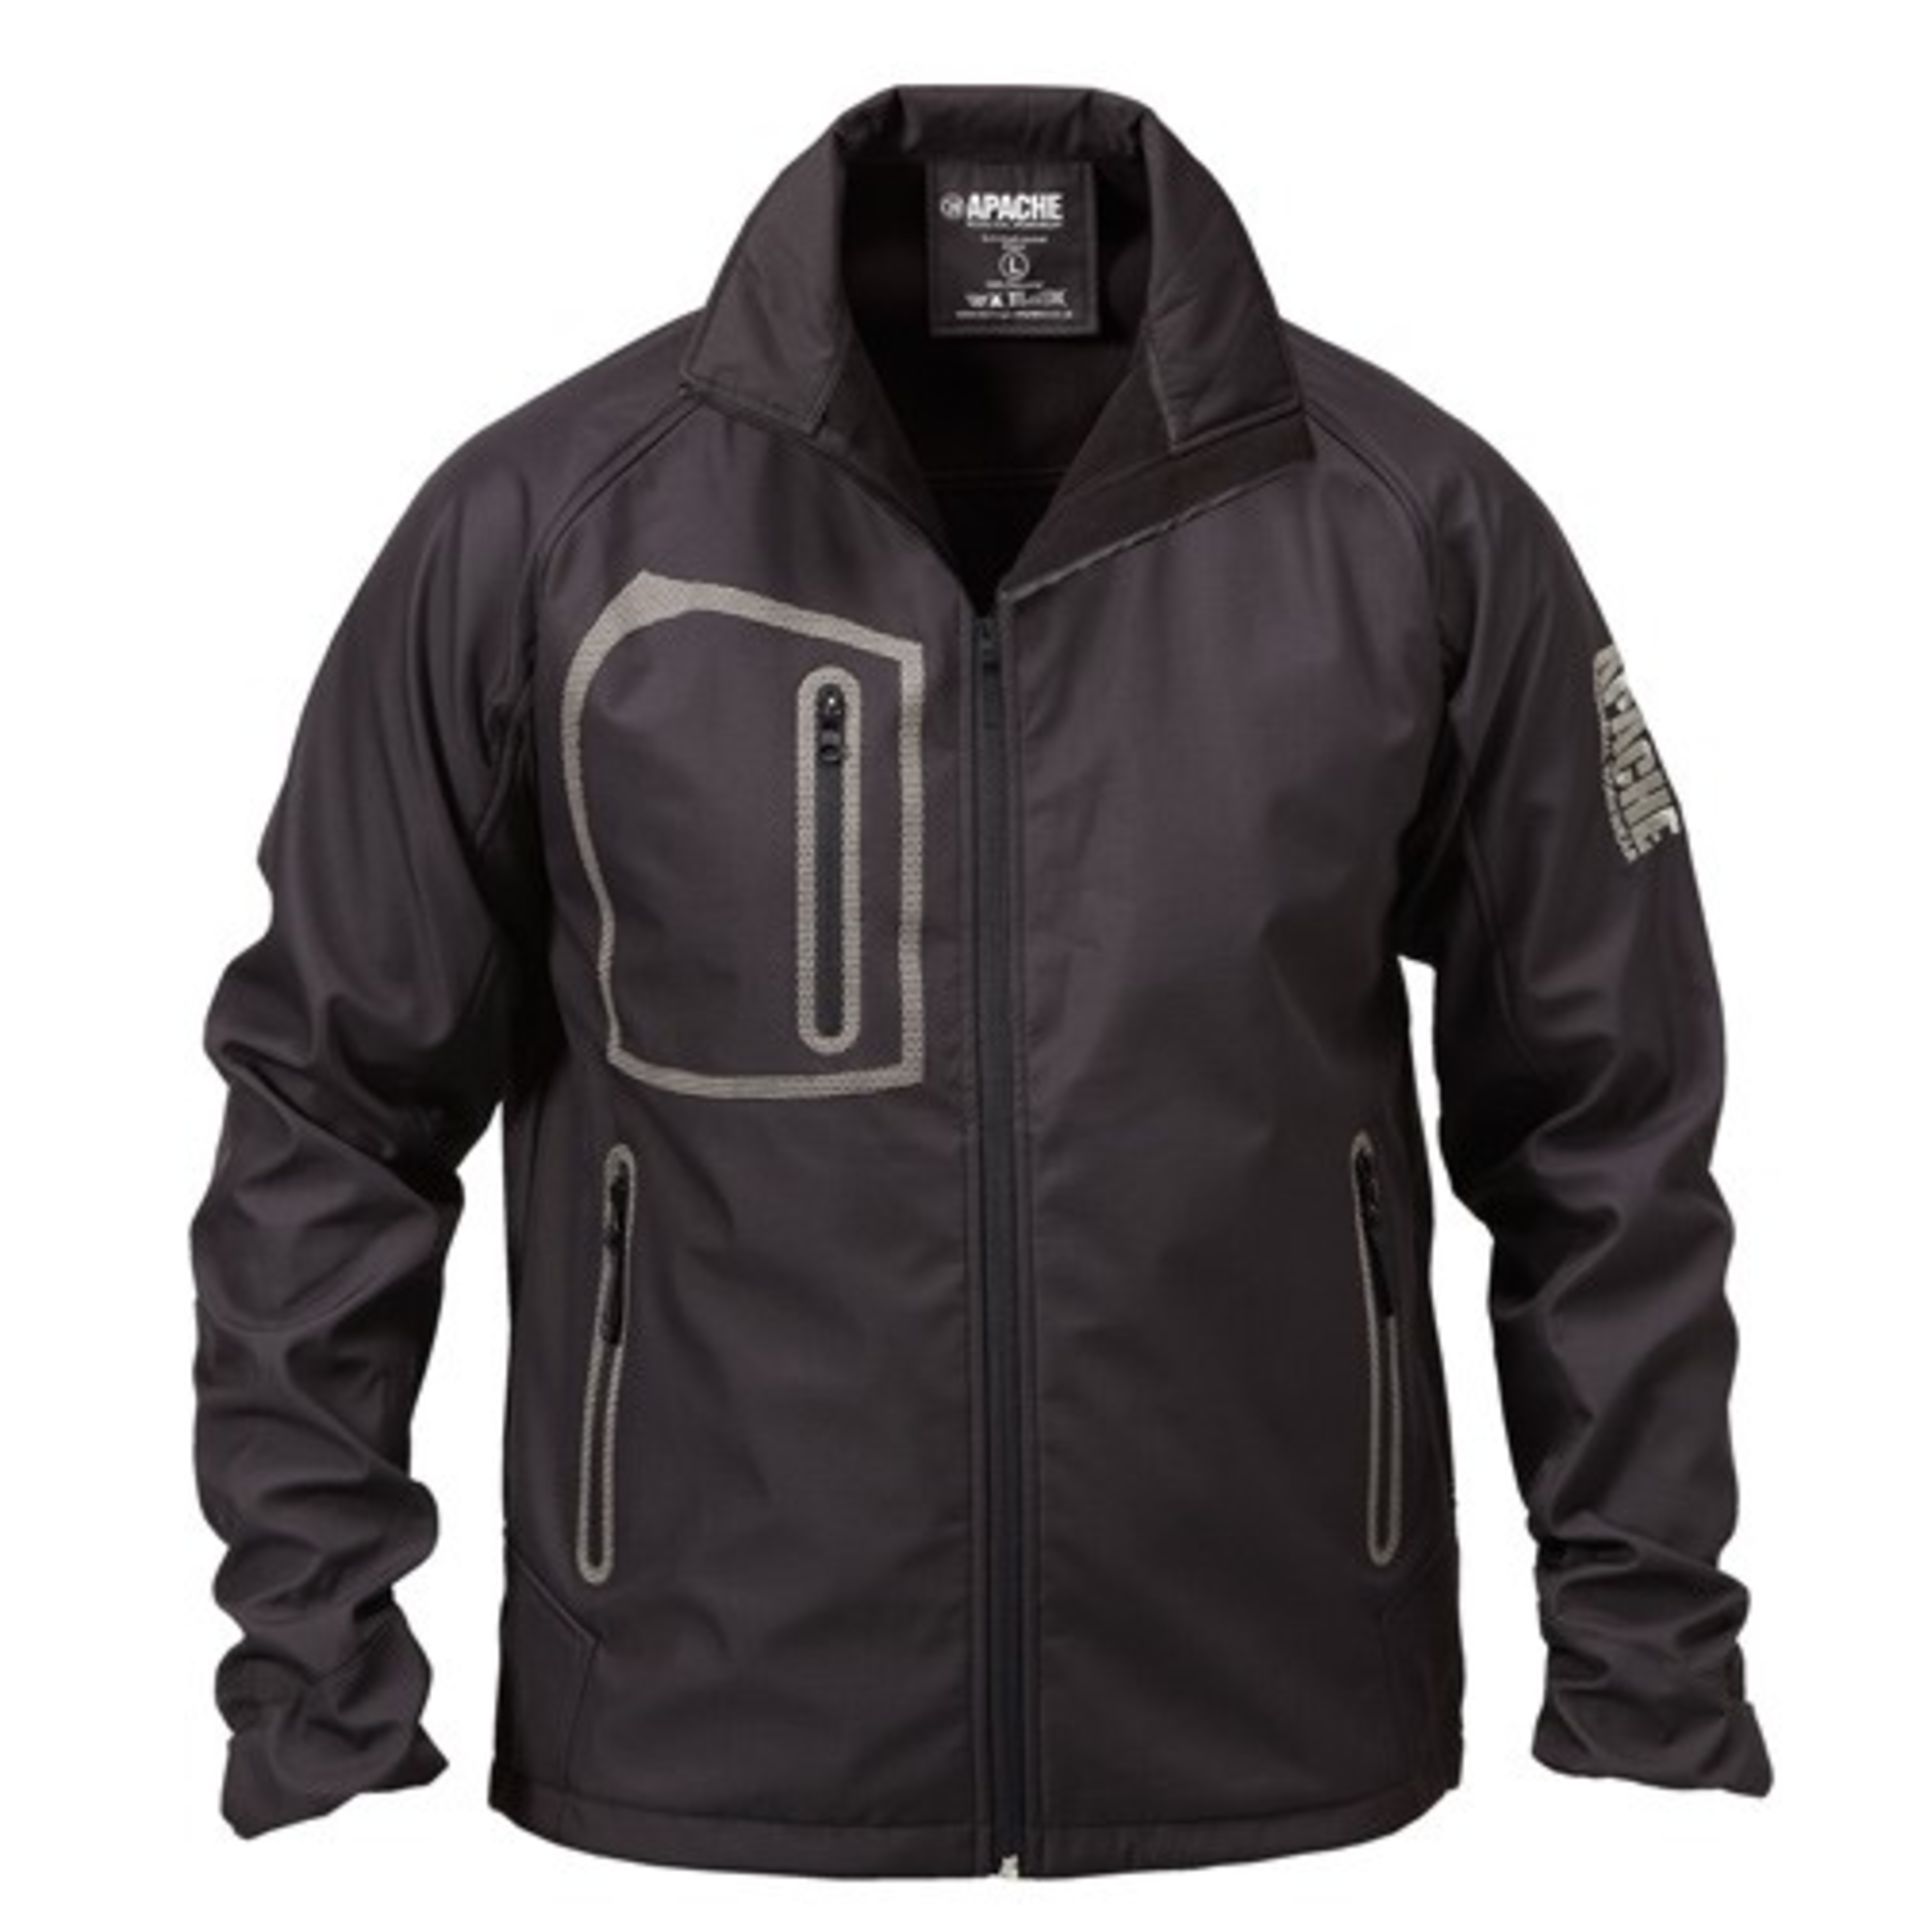 1 AS NEW BAGGED APACHE SOFT SHELL JACKET IN BLACK / SIZE - L / PN - NPN / RRP £41.99 (VIEWING HIGHLY